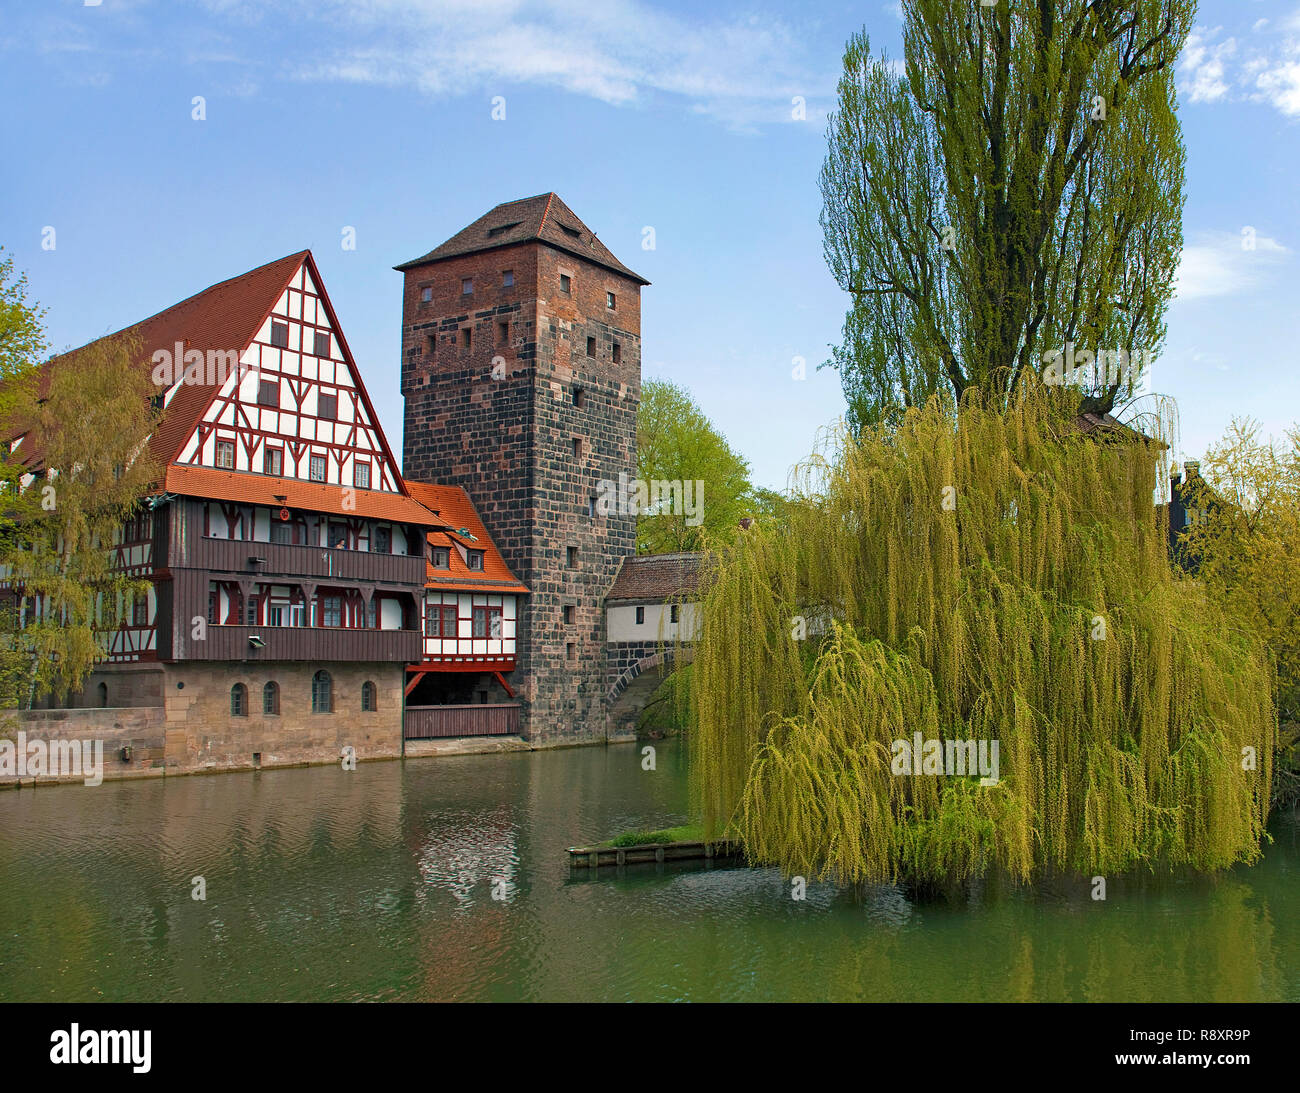 Old Wine house and water tower at the Max bridge, Pegnitz river, old town, Nuremberg, Franconia, Bavaria, Germany, Europe Stock Photo